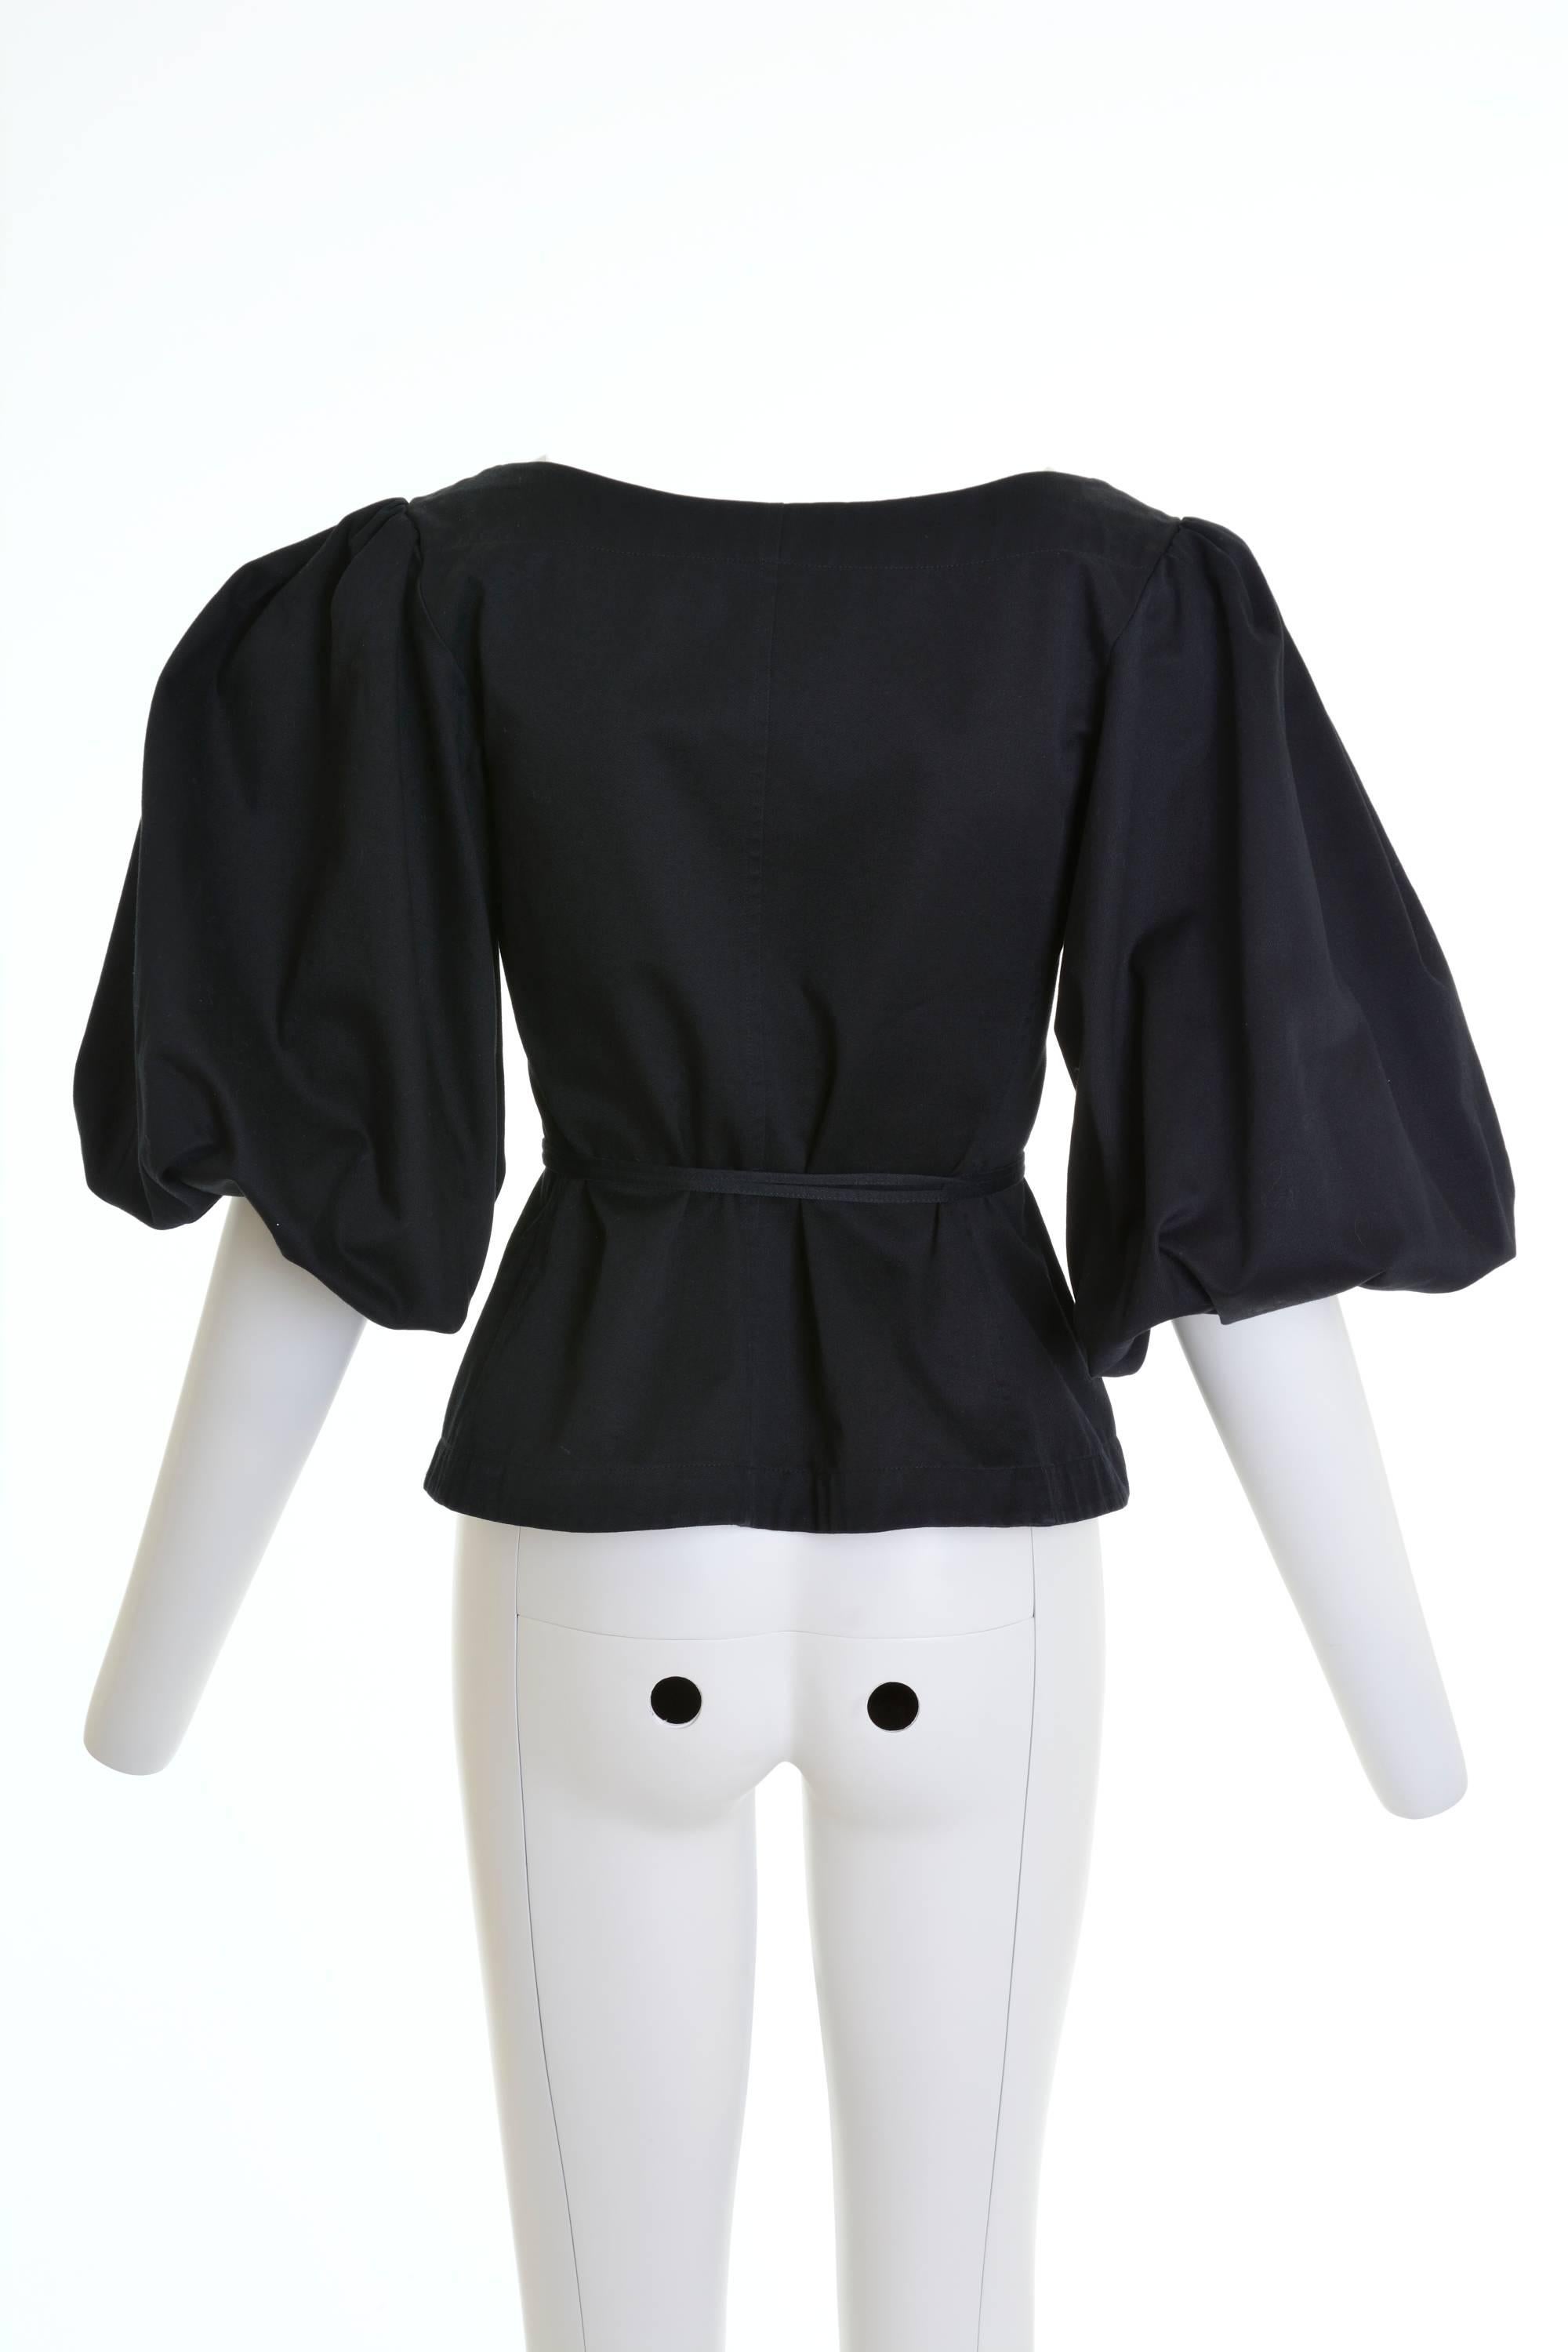 This amazing and Iconic YVES SAINT LAURENT Rive Gauche 1990s blouse shirt is in a black pique cotton fabric with large balloon sleeve and lace up closure.

Excellent vintage condition

Label: Yves Saint Laurent Rive Gauche (made in France)
Fabric: